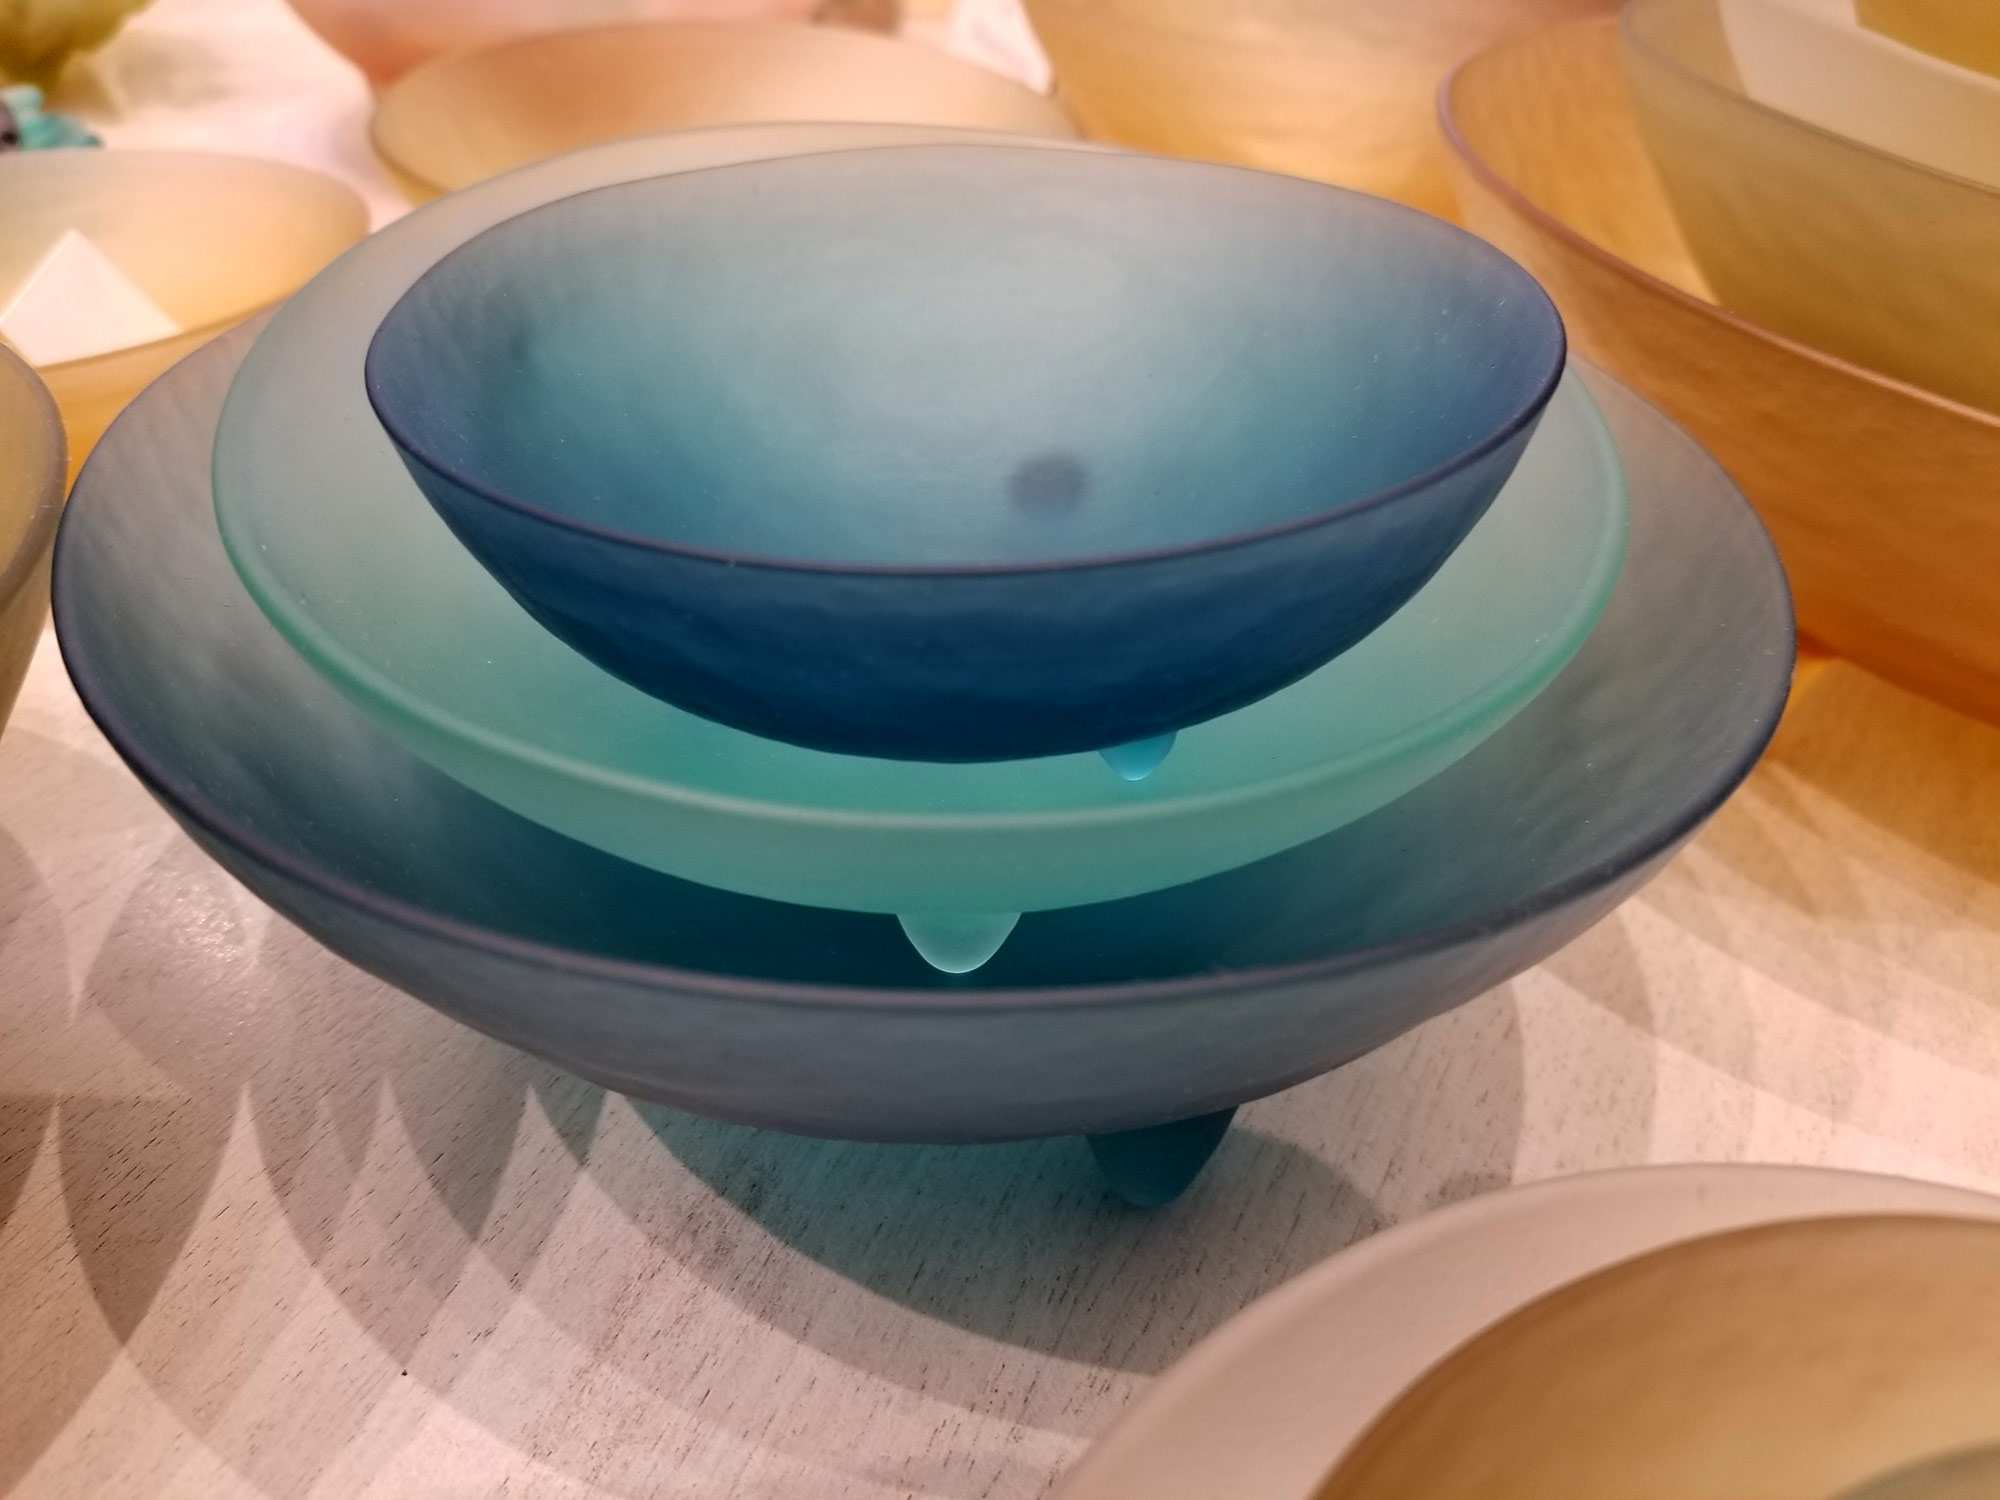  frosted glass bowls ©2018 by bret wills